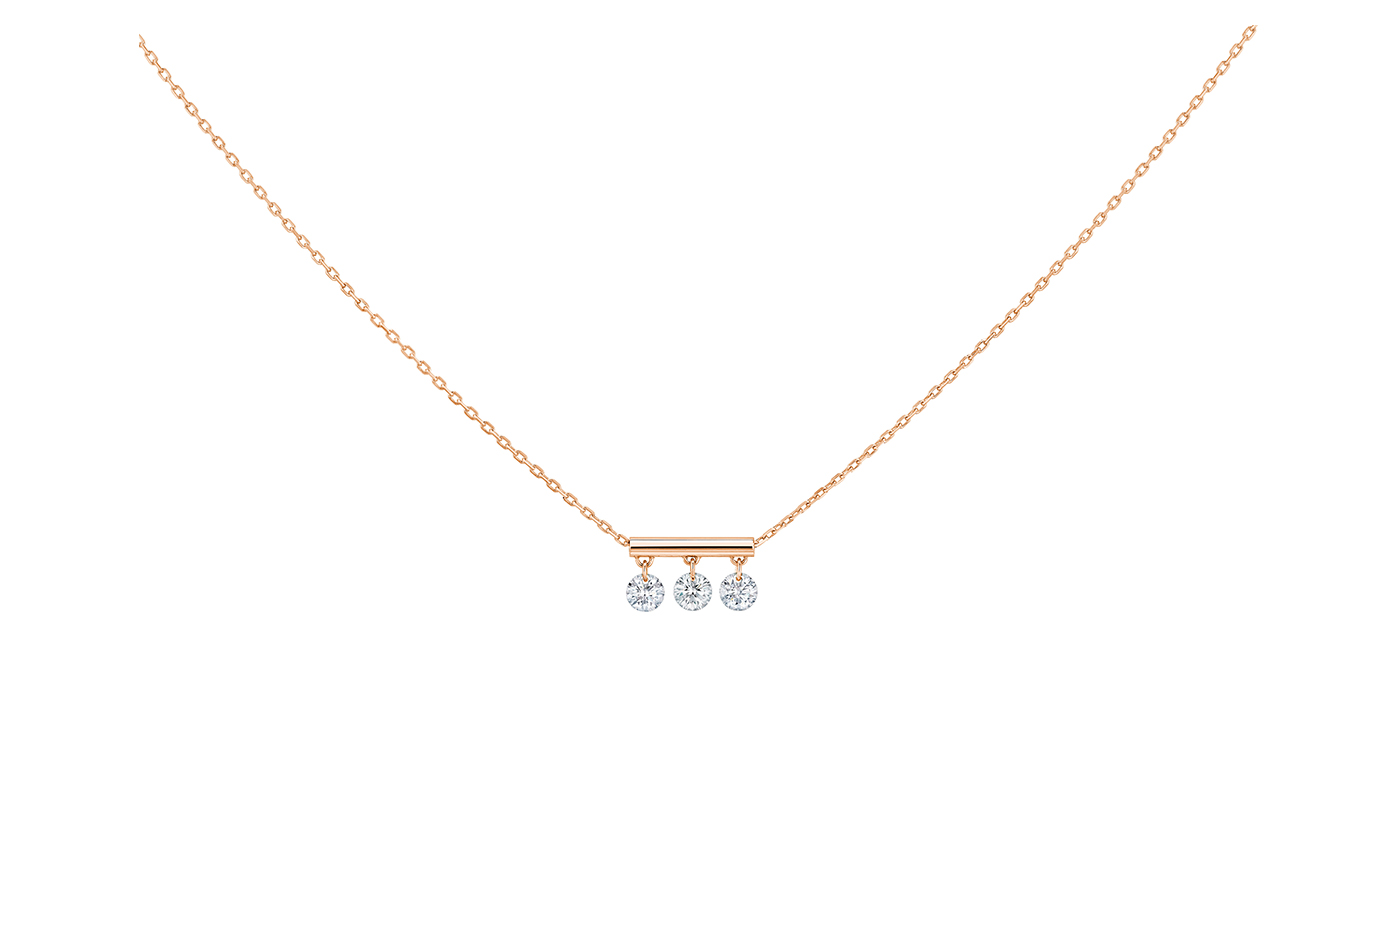 COLLIER PAMPILLES – 3 DIAMANTS, poids total  0,30 ct approx., or 18KT, 1,2 gr.